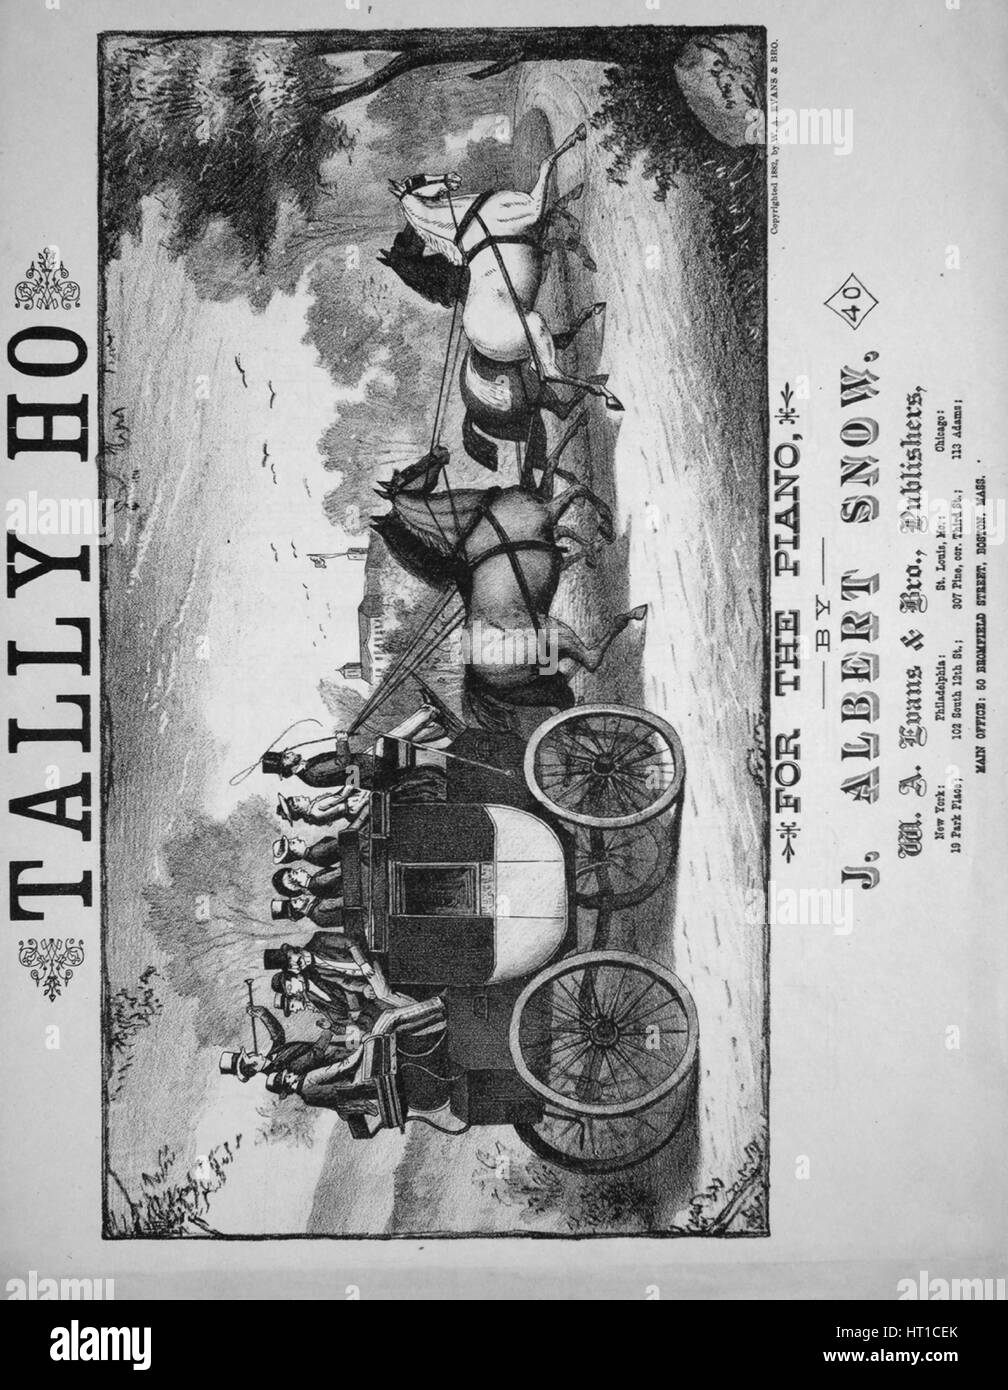 Sheet music cover image of the song 'Tally Ho', with original authorship notes reading 'By J Albert Snow', United States, 1882. The publisher is listed as 'W.A. Evans and Bro., Publishers, 19 Park Place', the form of composition is 'sectional', the instrumentation is 'piano', the first line reads 'None', and the illustration artist is listed as 'None'. Stock Photo